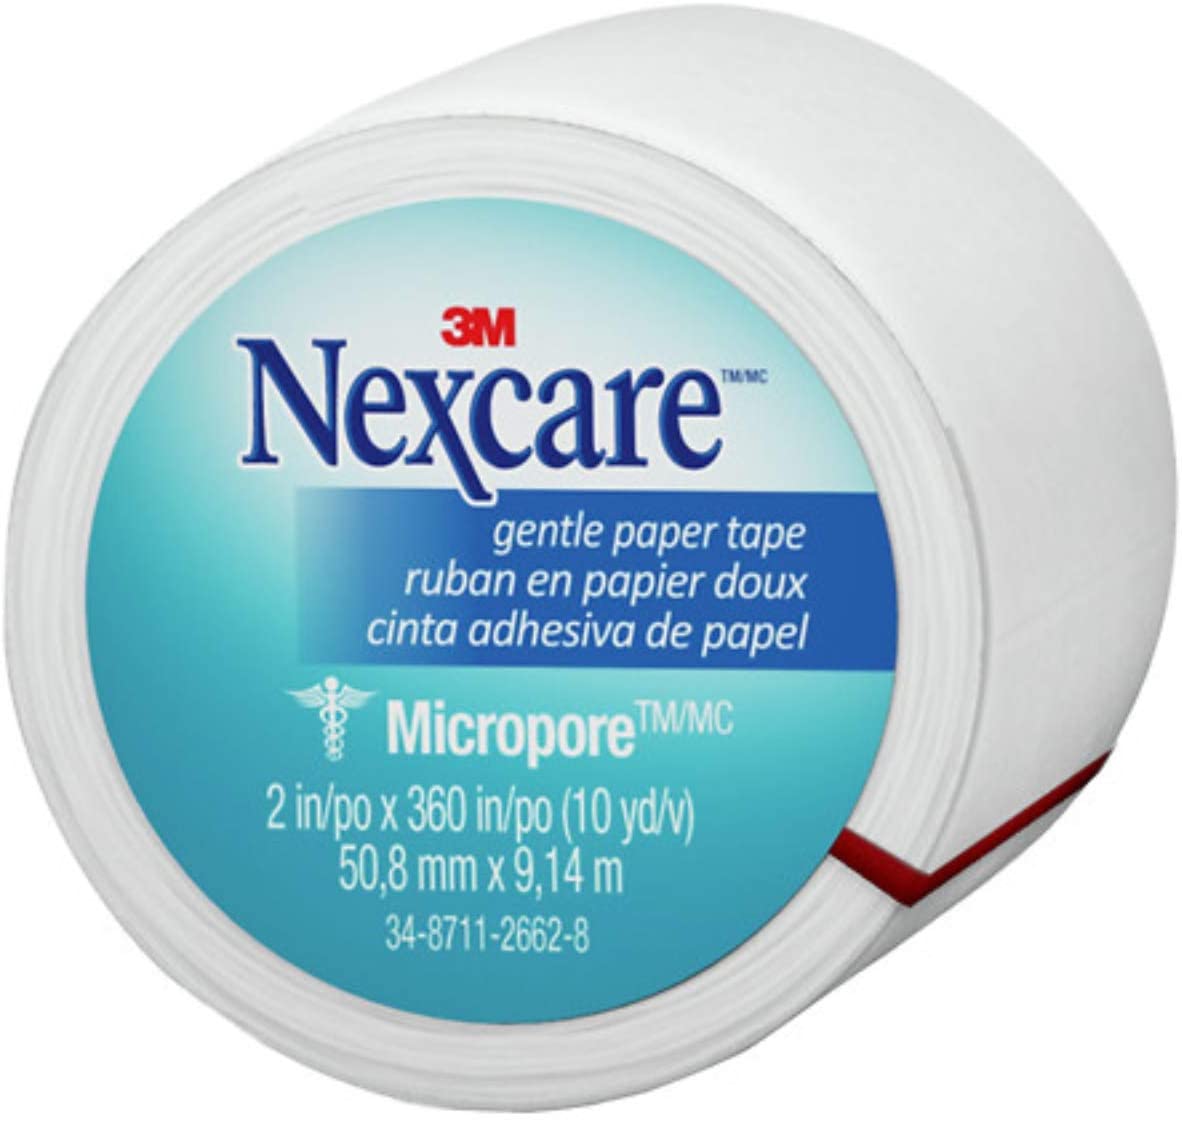 Nexcare Gentle Paper Tape for Frequent Changes, 2 Ea, 6 Pack